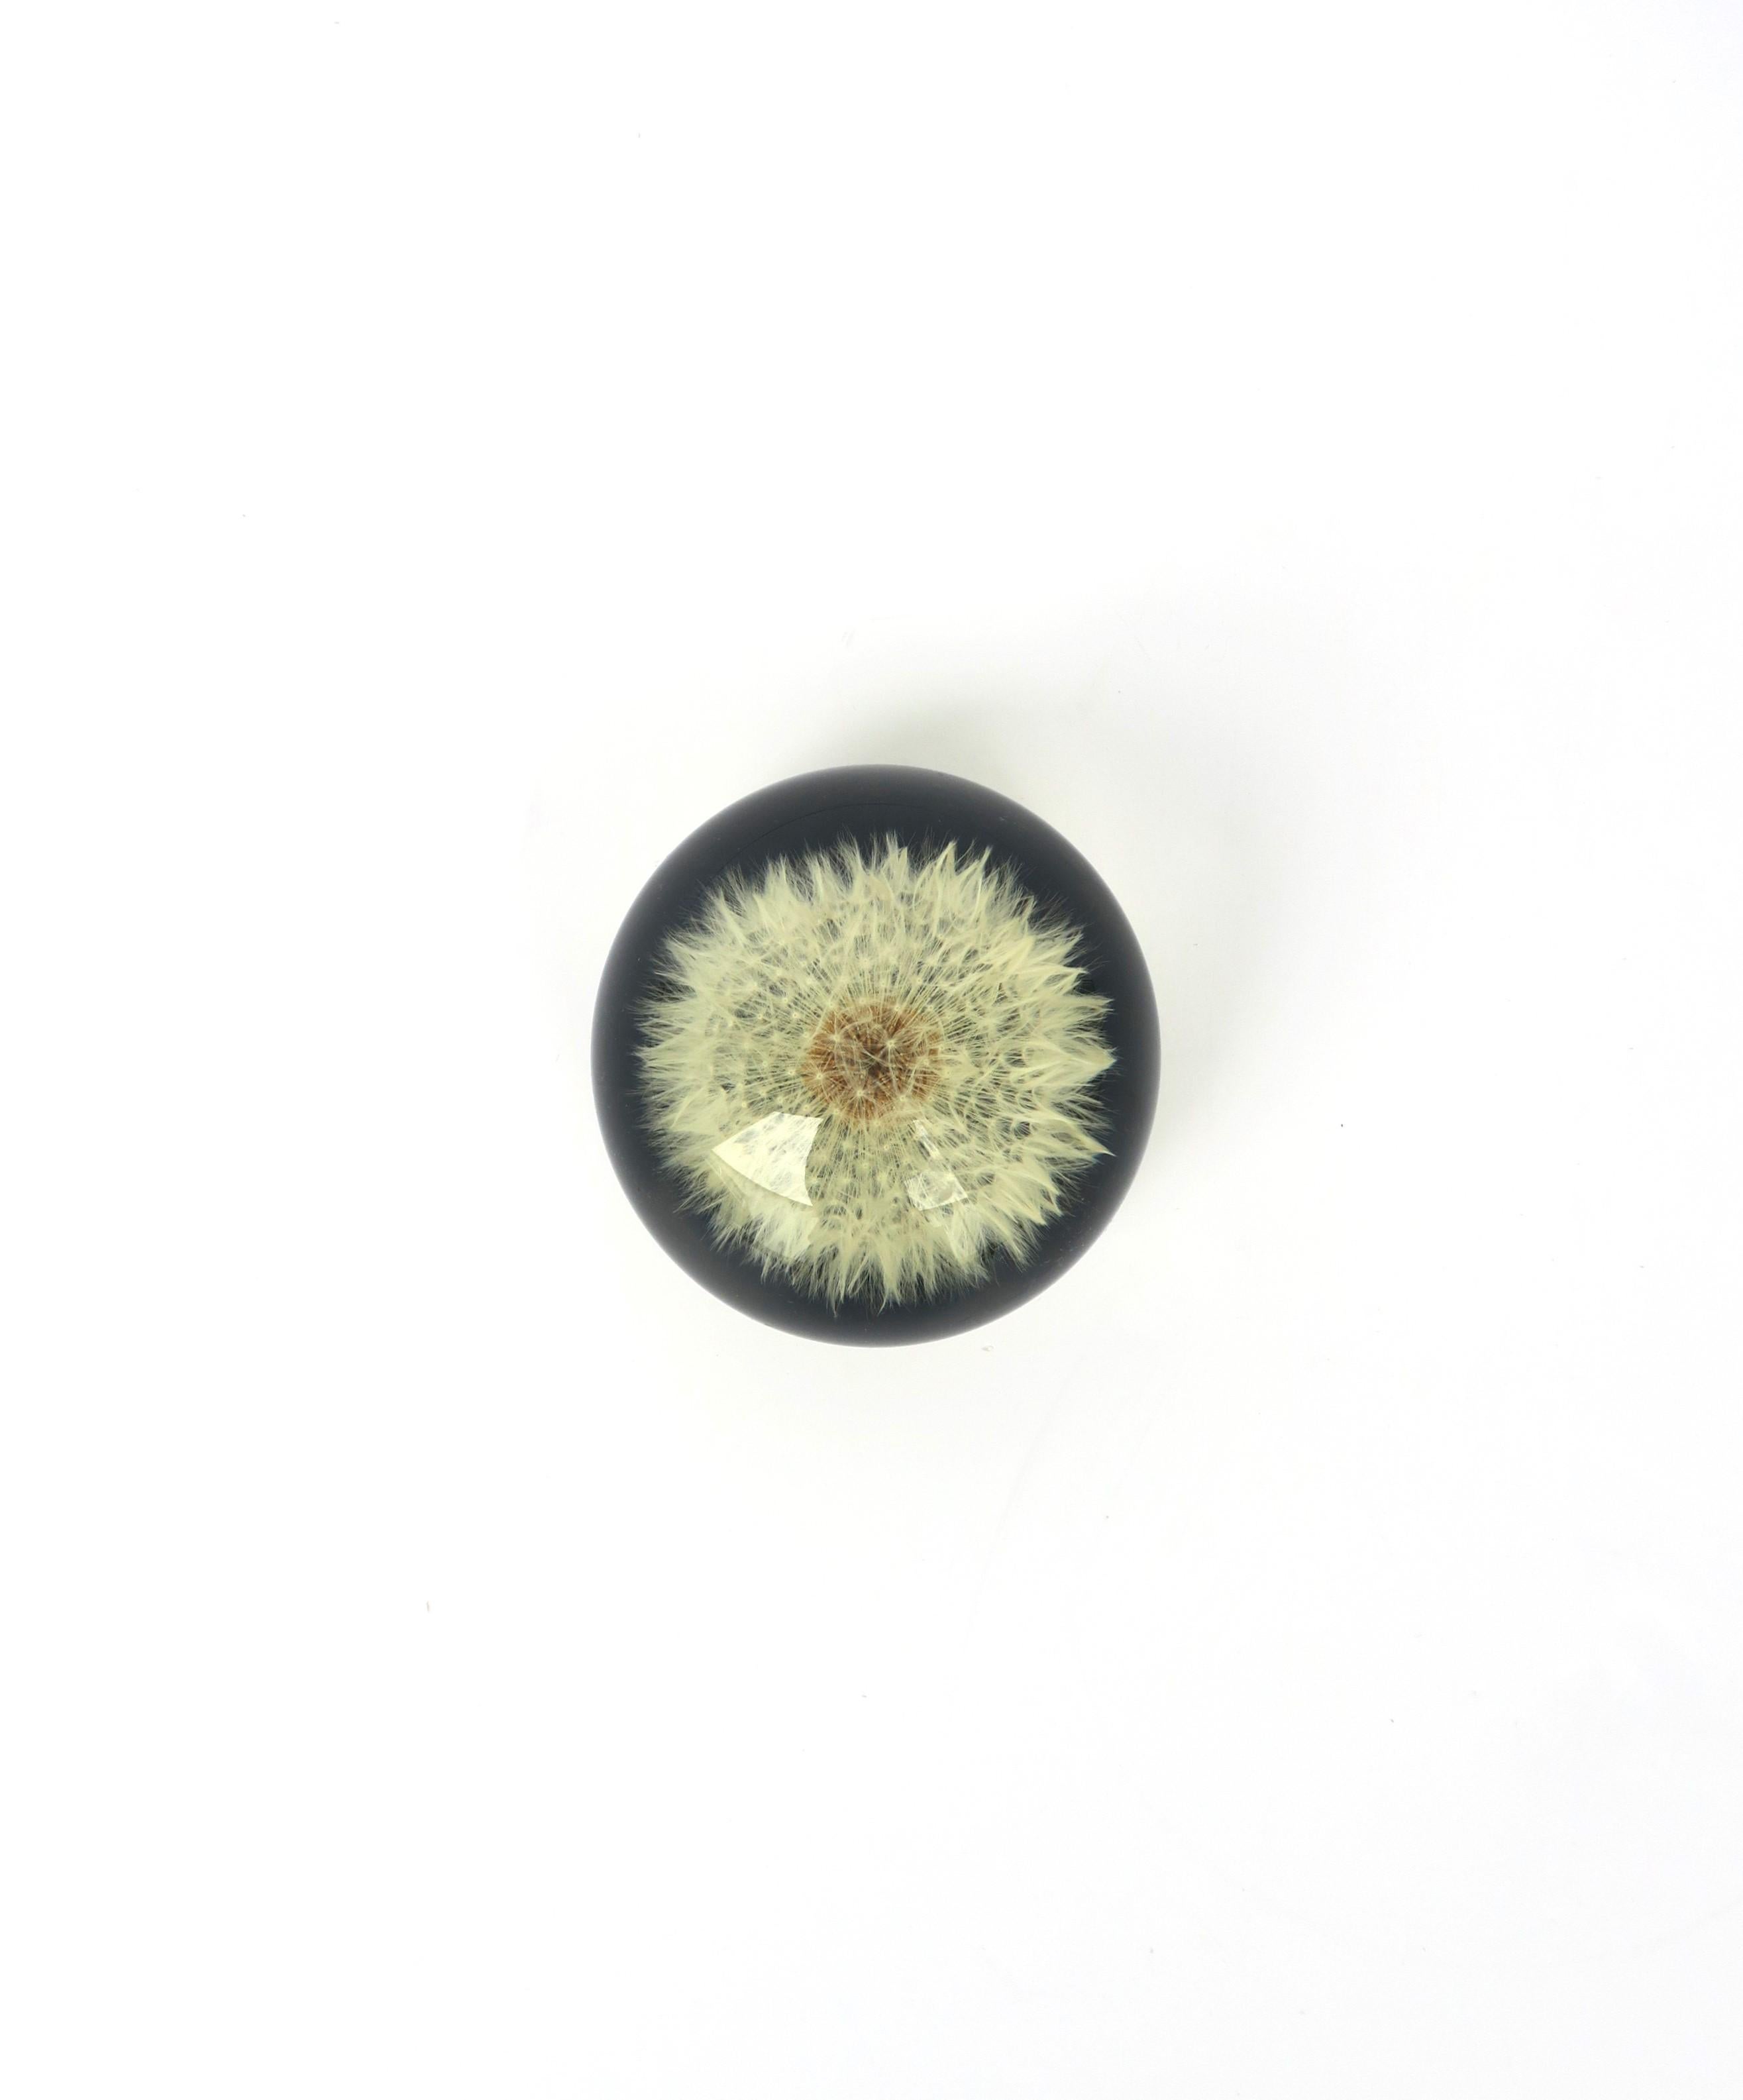 A Lucite or acrylic encased 'Dandelion' flower seed-head decorative object or paperweight in the Organic Modern style, circa late-20th century. Art meets nature meets technology. A paperweight or decorative object for an office, library, desk,